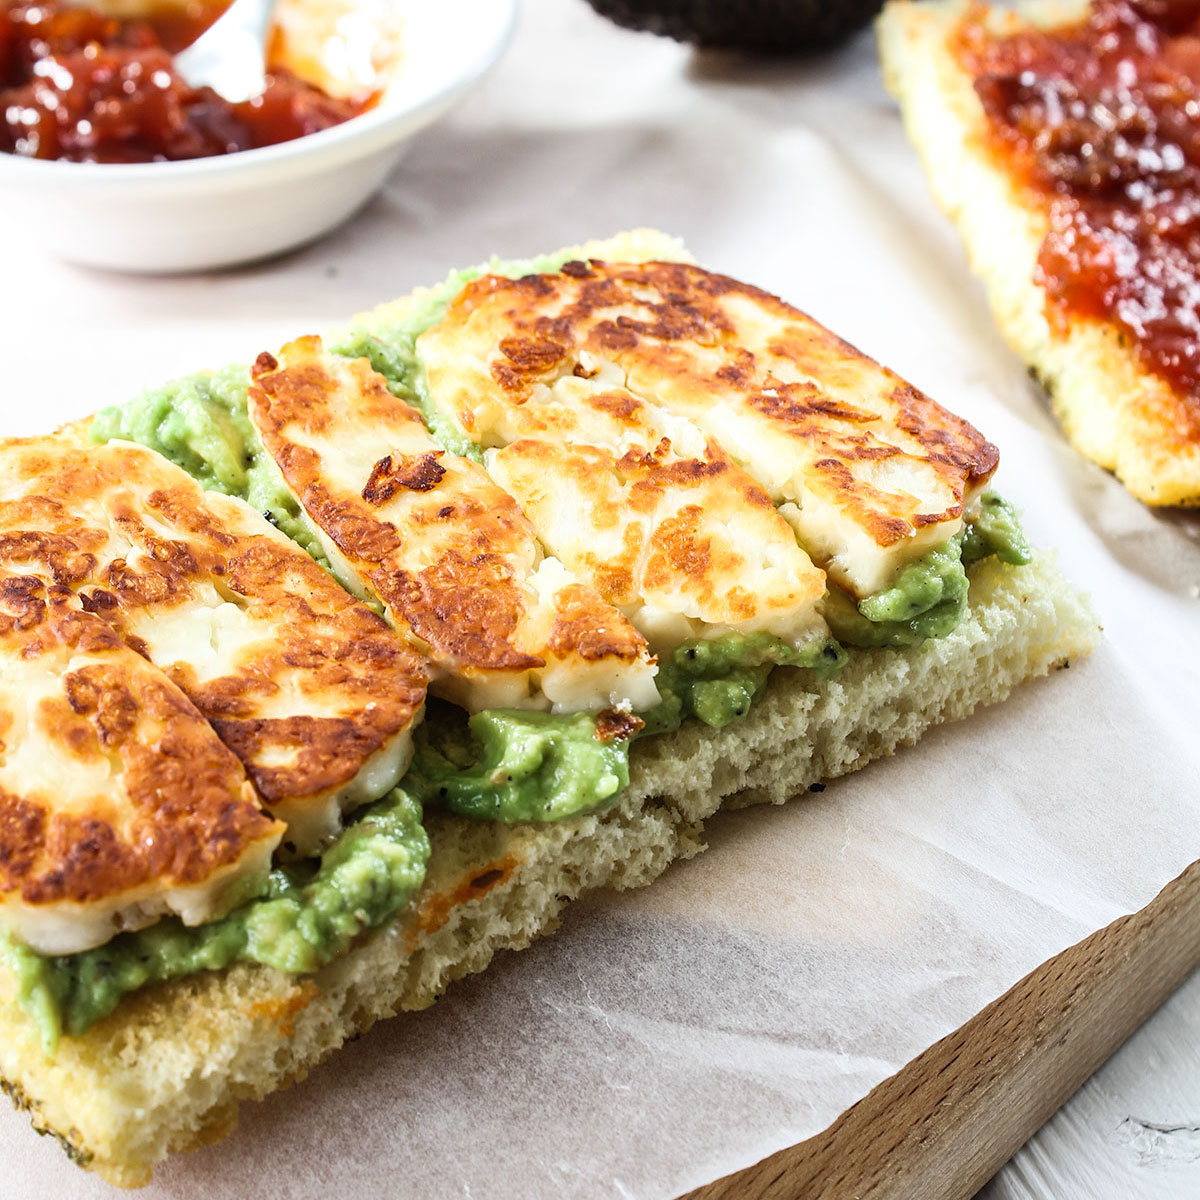 Easy Halloumi and Smashed Avocado Sandwich (on focaccia) - Knife and Soul